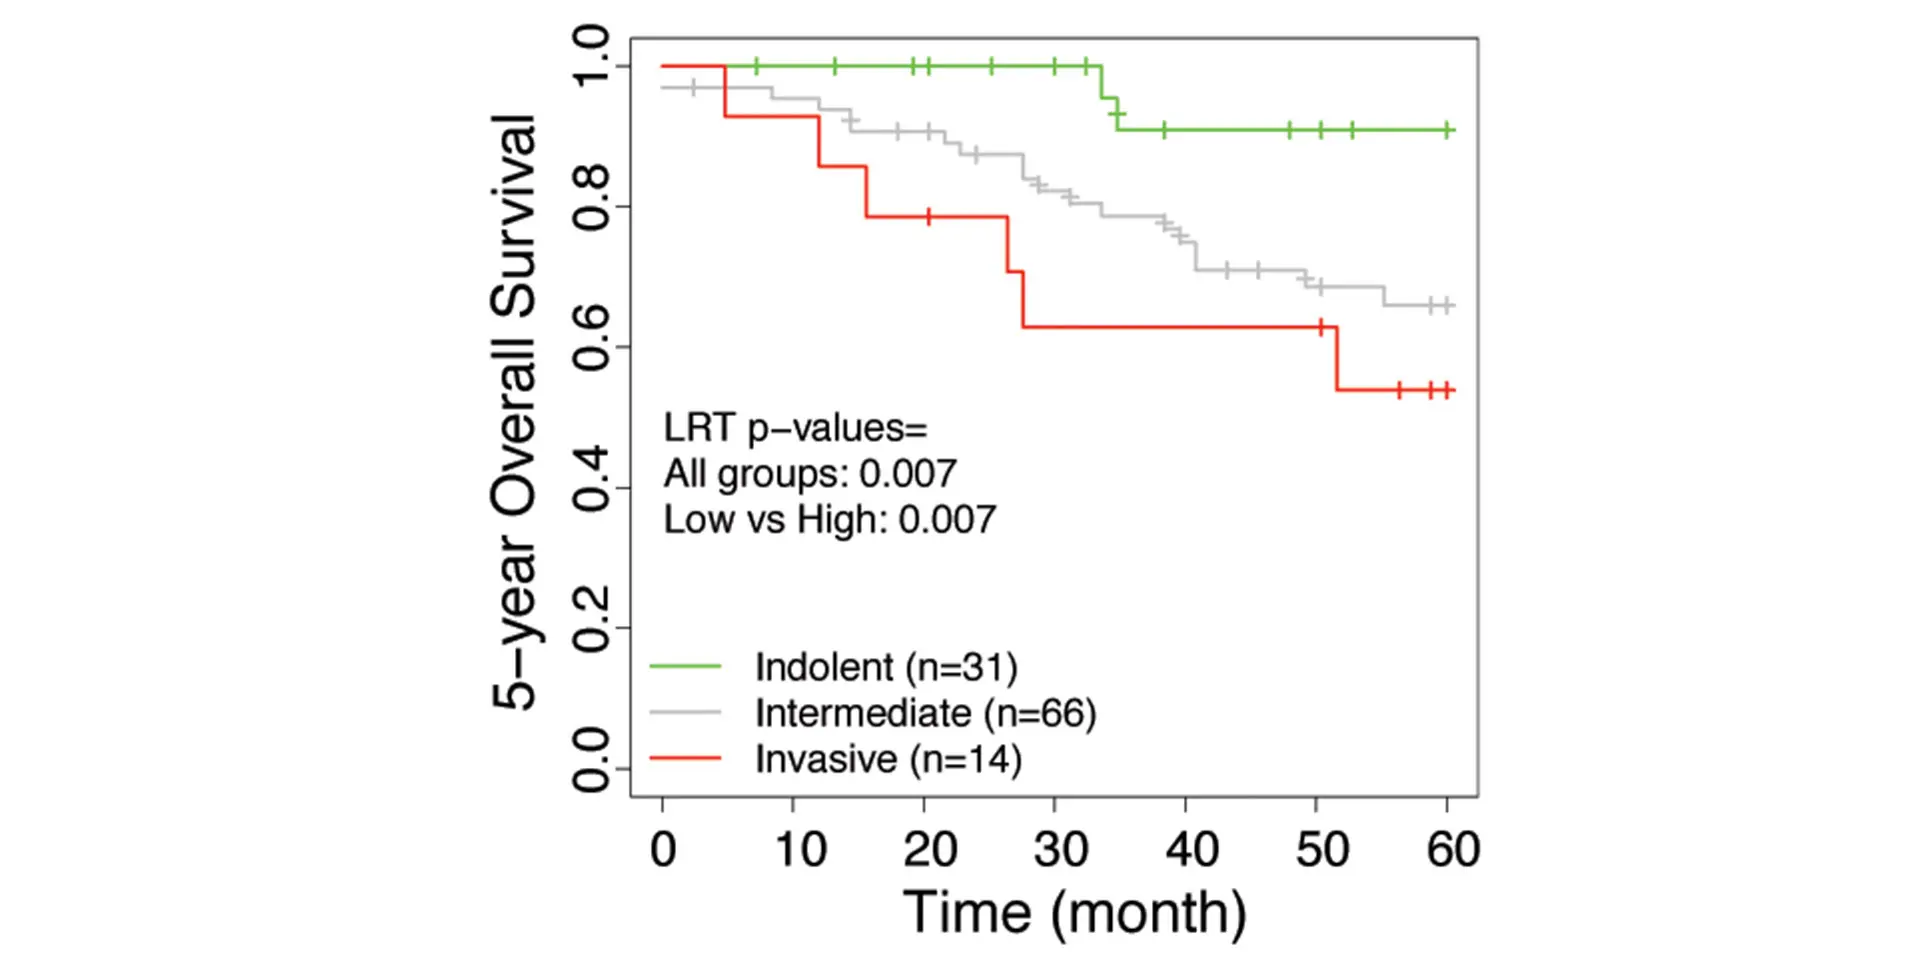 Stratification of tumor samples of each lung adenocarcinoma cohort into three groups based on IVS; invasive (high IVS), intermediate (middle IVS), and indolent (low IVS) tumors. Five-year survival of tumors was shown in a KM curve with corresponding LRT p-values. d) Tang et al. 